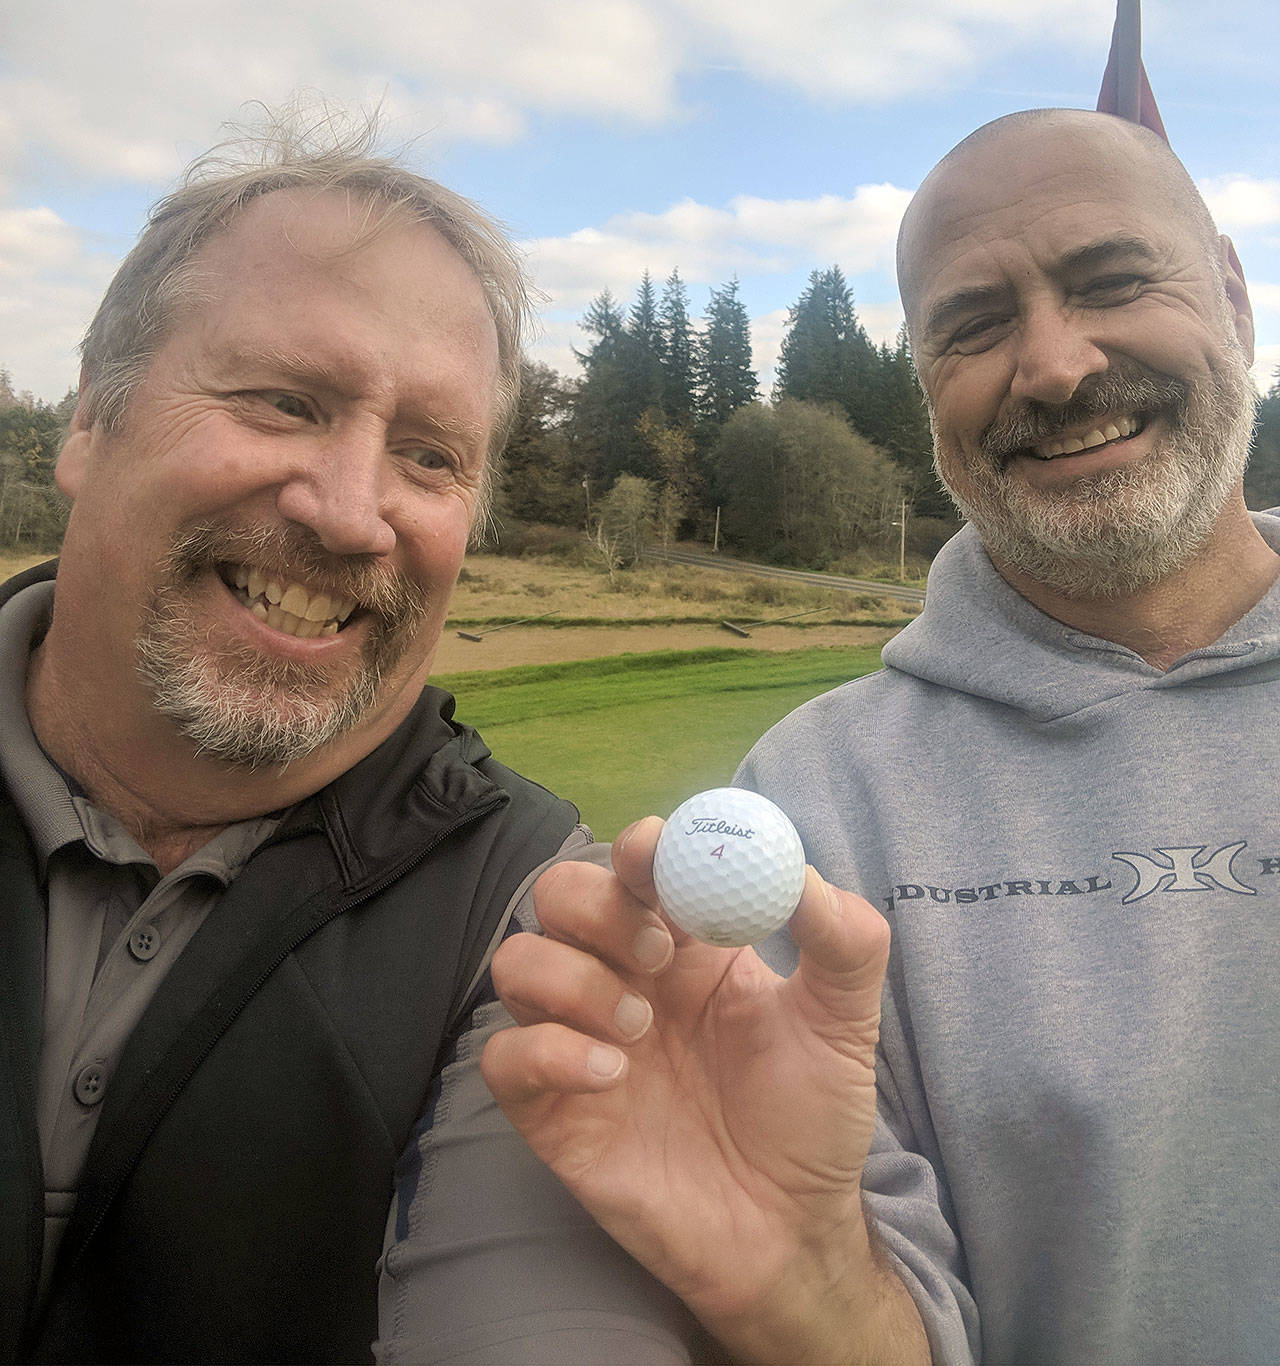 Pat Gouchner, right, is all smiles after hitting a hole-in-one on the No. 7 hole at Grays Harbor Country Club on Friday. Gouchner’s ace was witnessed by Rick Moore, left. (Submitted Photo)